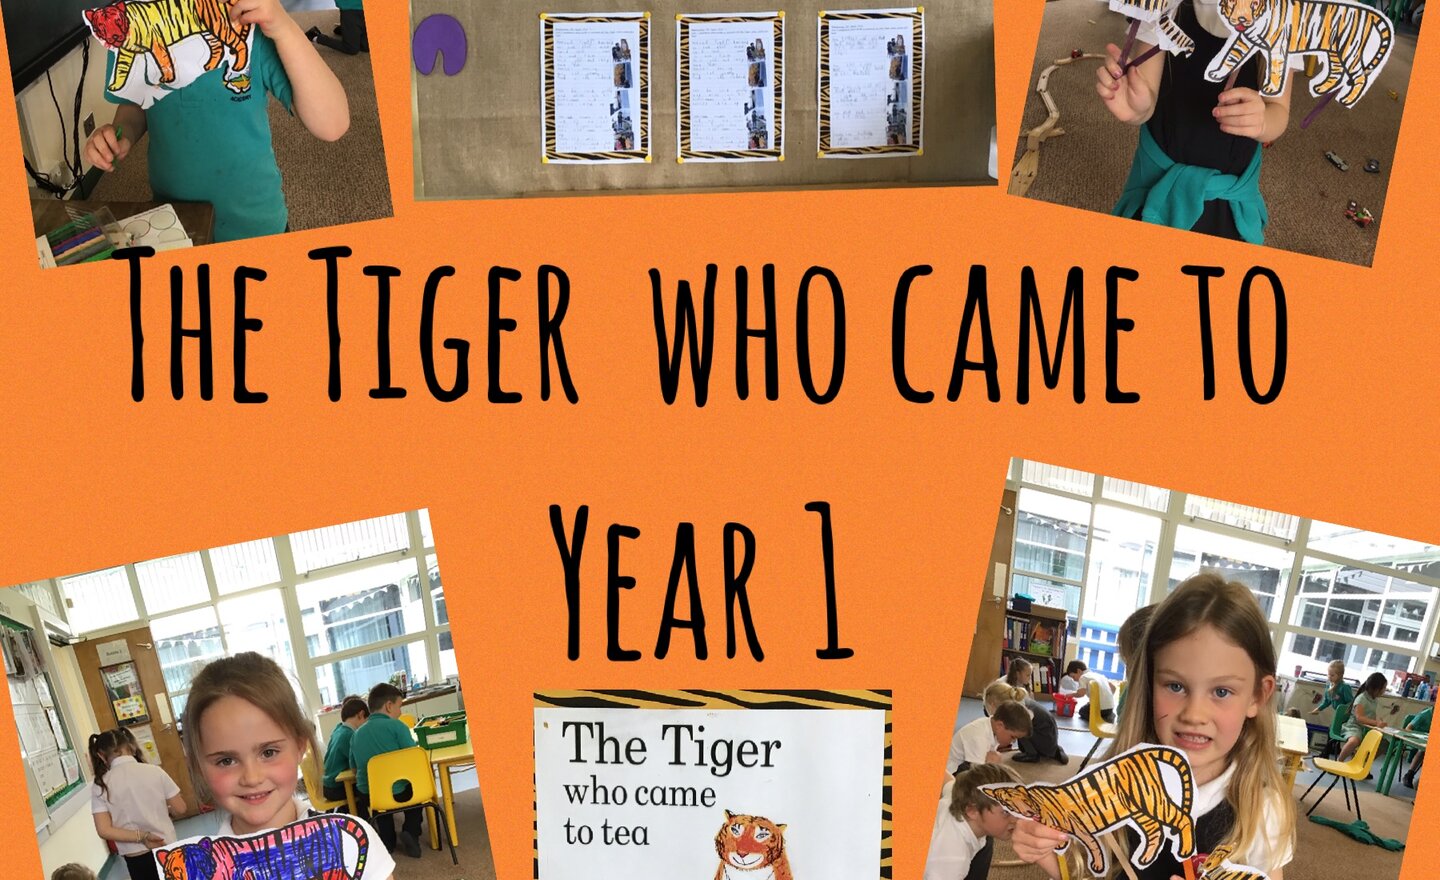 Image of The Tiger who came to Year 1